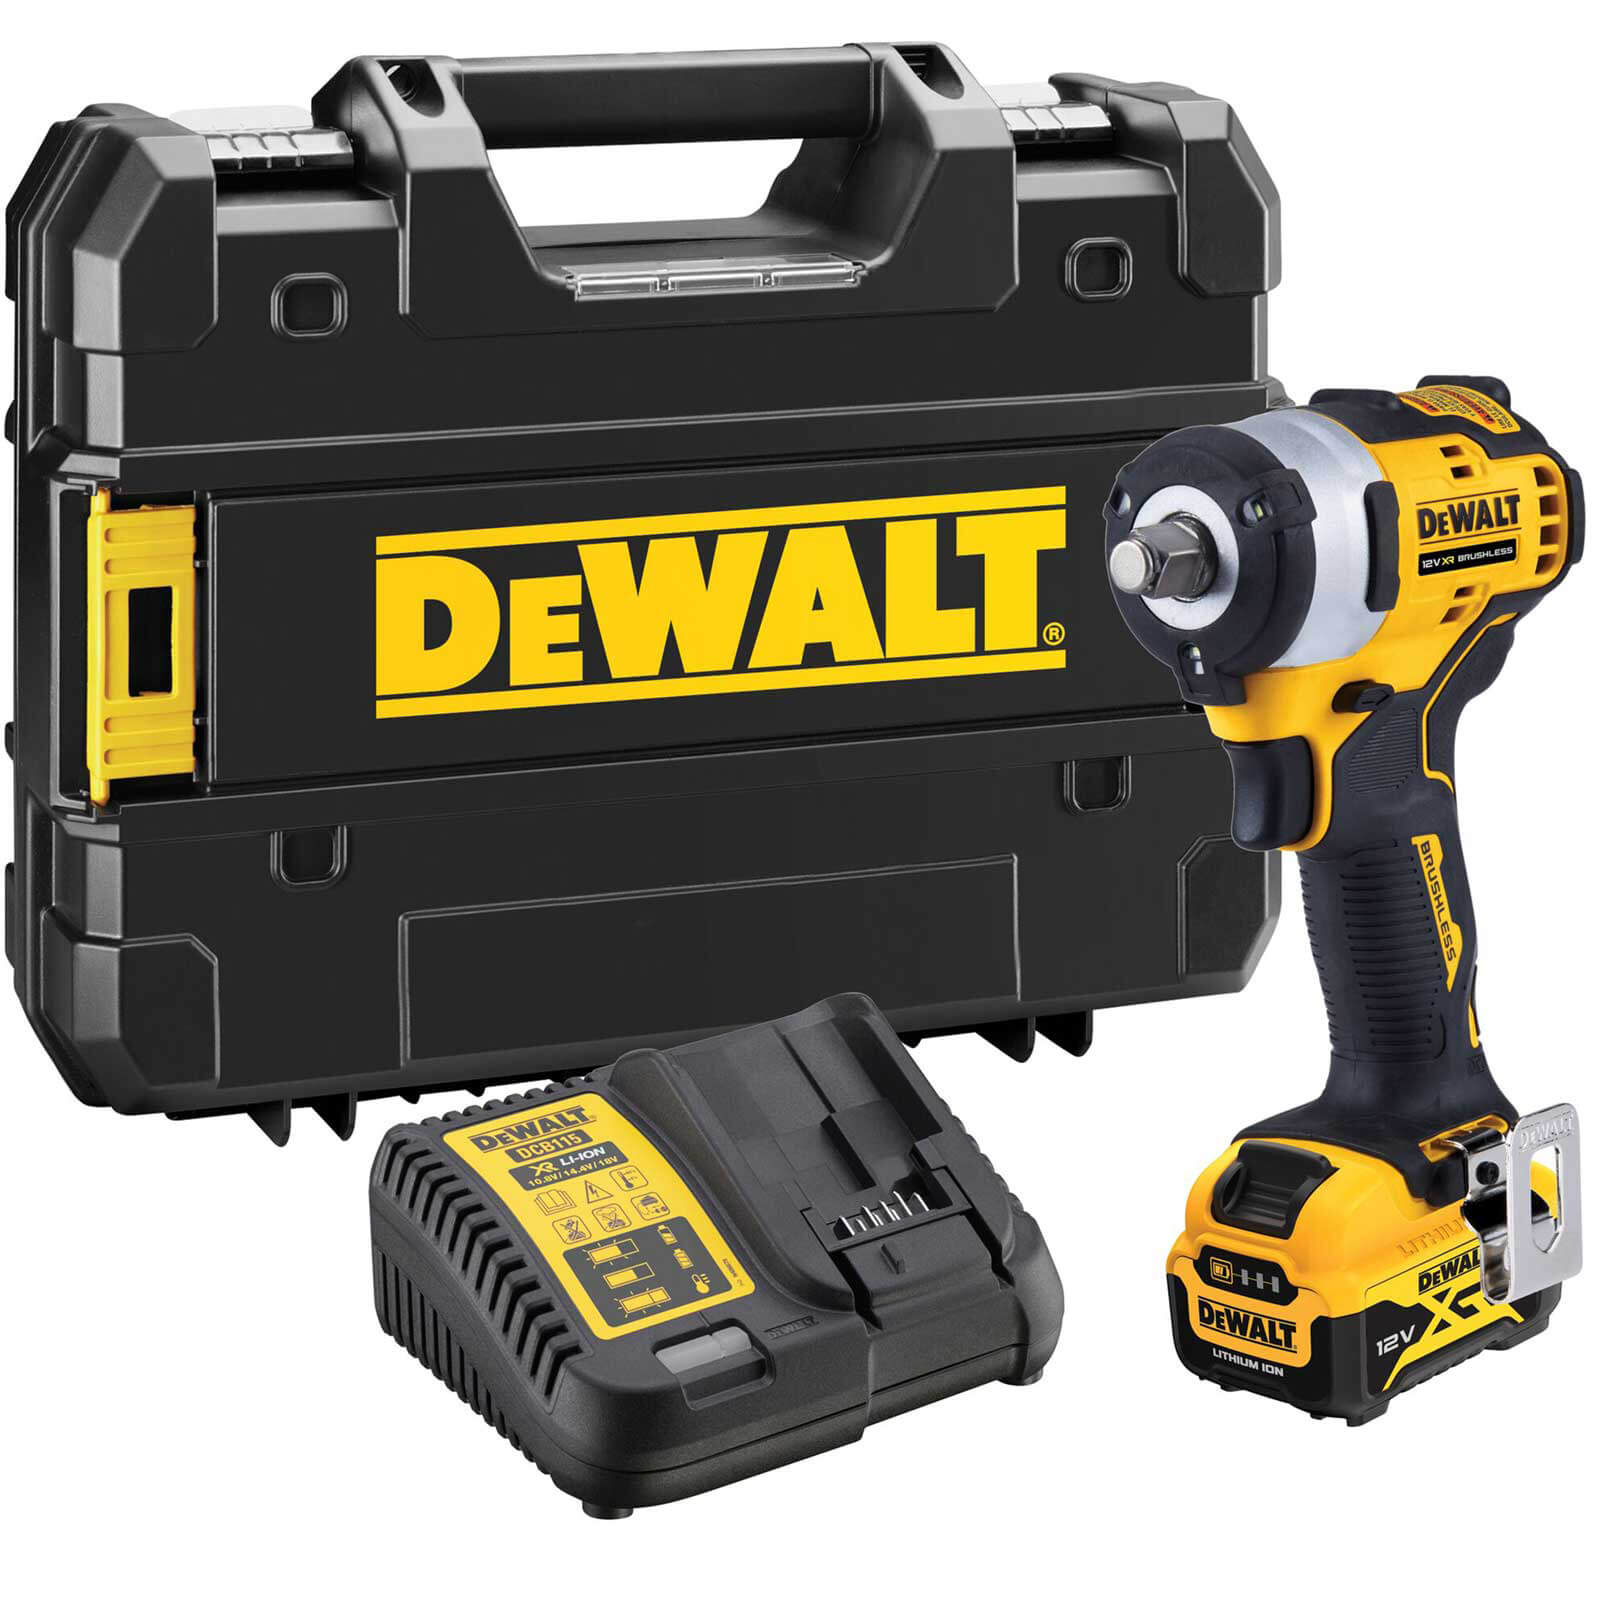 DeWalt DCF901 12v XR Cordless Brushless Compact 1/2" Drive Impact Wrench 1 x 5ah Li-ion Charger Case